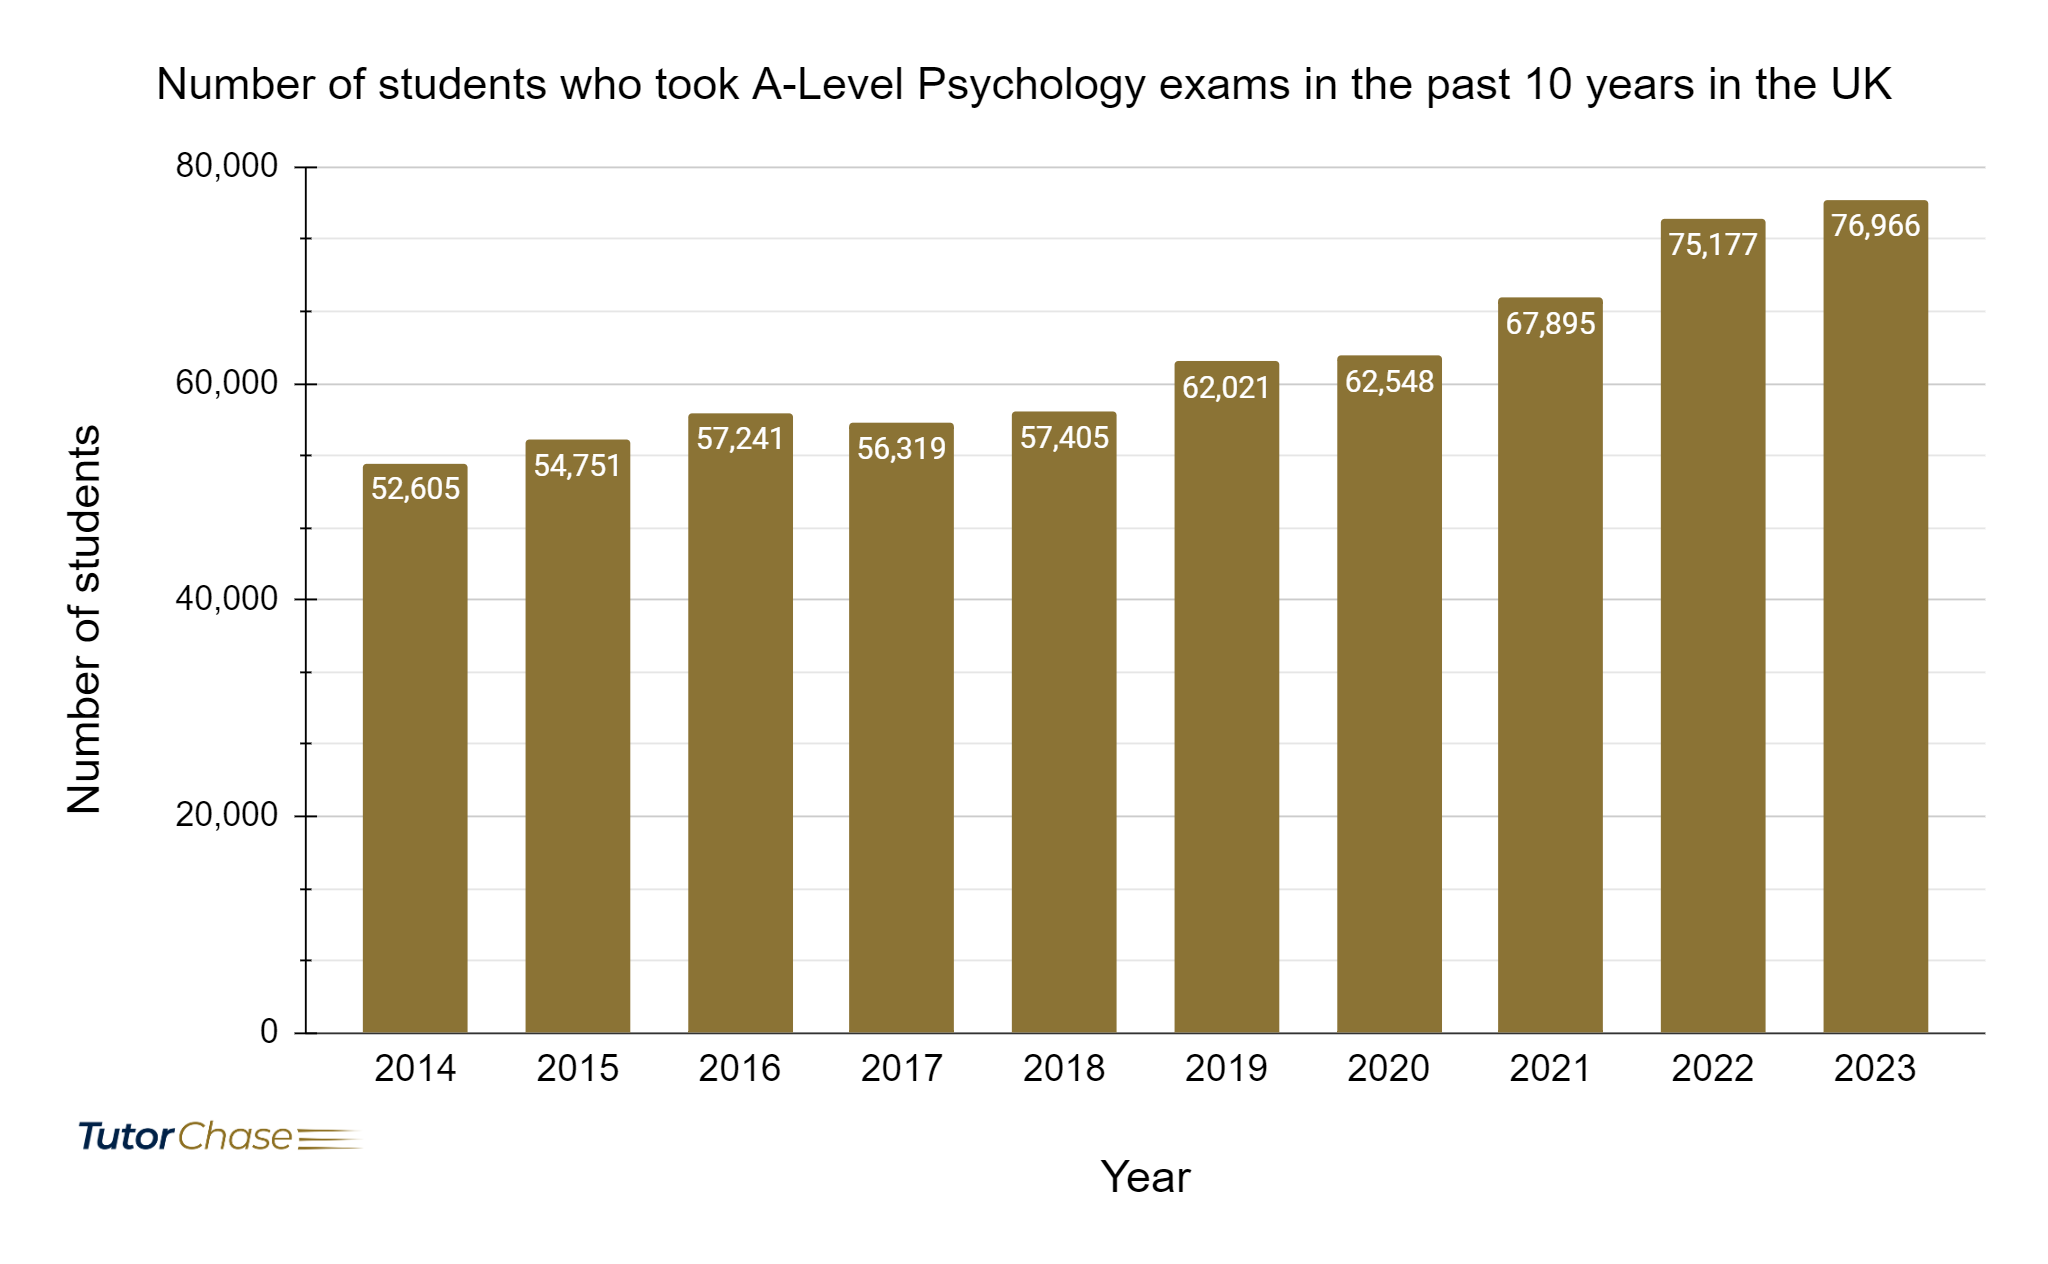 Number of students who took A-Level Psychology exams in the past 10 years